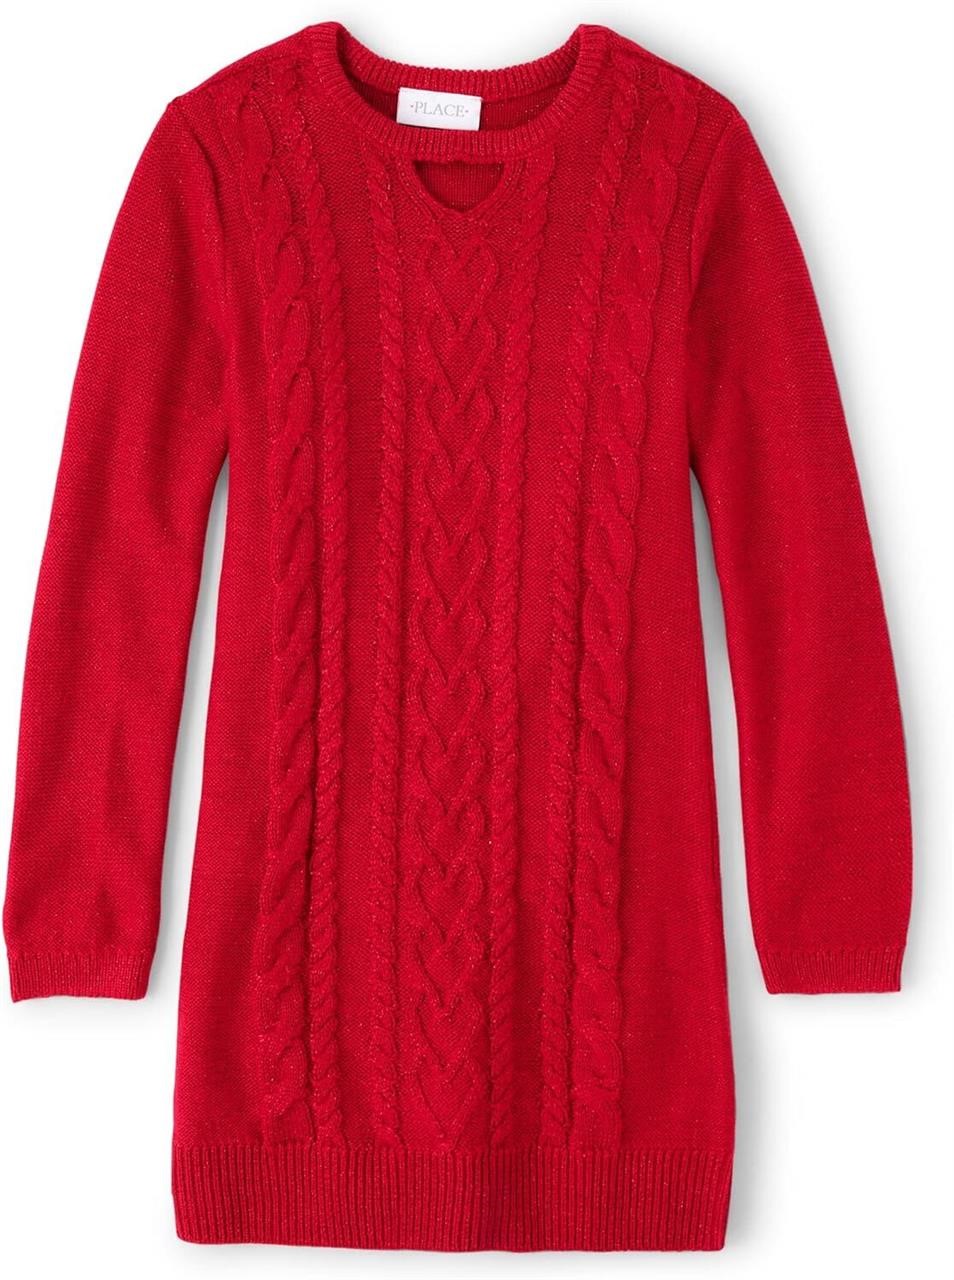 The Children's Place Girls' Sweater Dress Red 5T